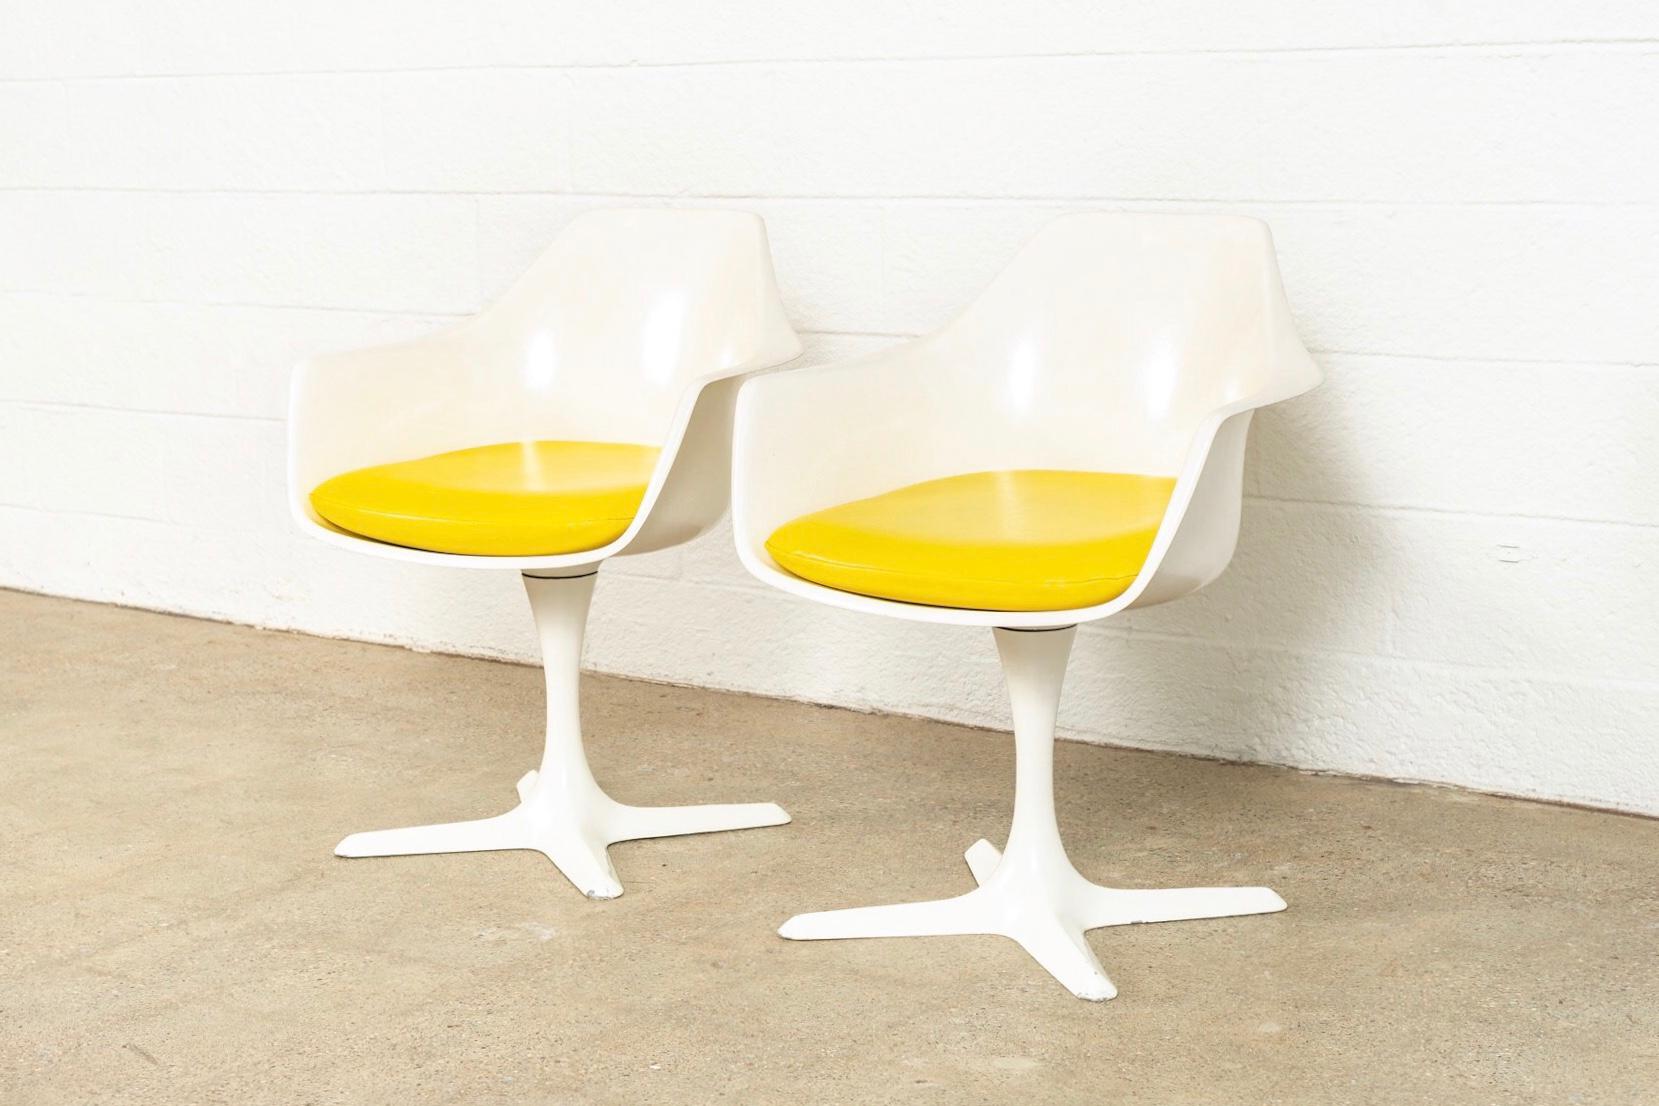 This pair of vintage Mid-Century Modern Burke tulip chairs in the style of Eero Saarinen are circa 1960. The iconic tulip design has clean lines and elegant curves. This set of armchairs features a white molded fiberglass seat form on a 360 degree